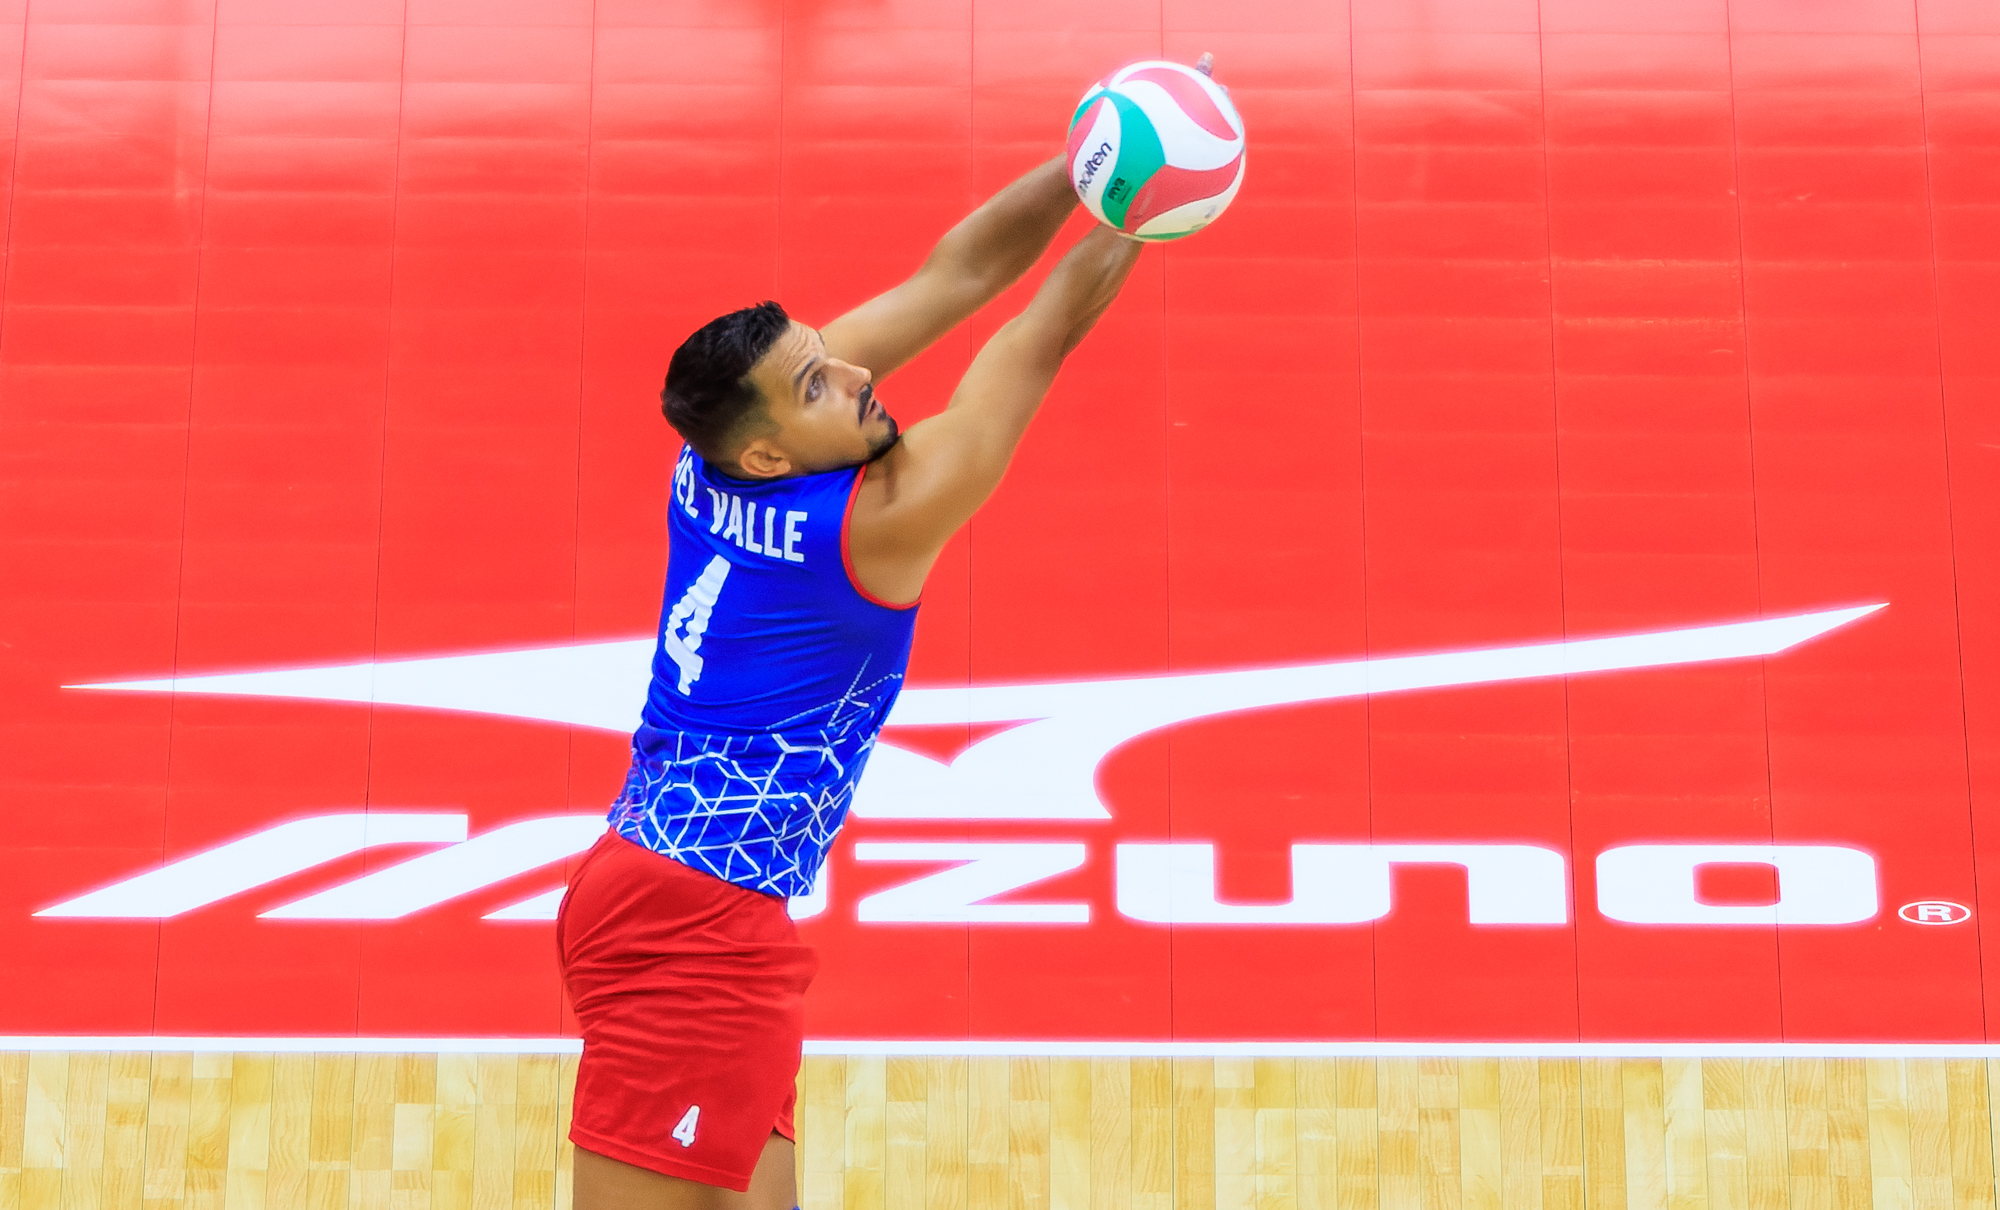 Puerto Rico finishes fifth at the Pan Am Cup